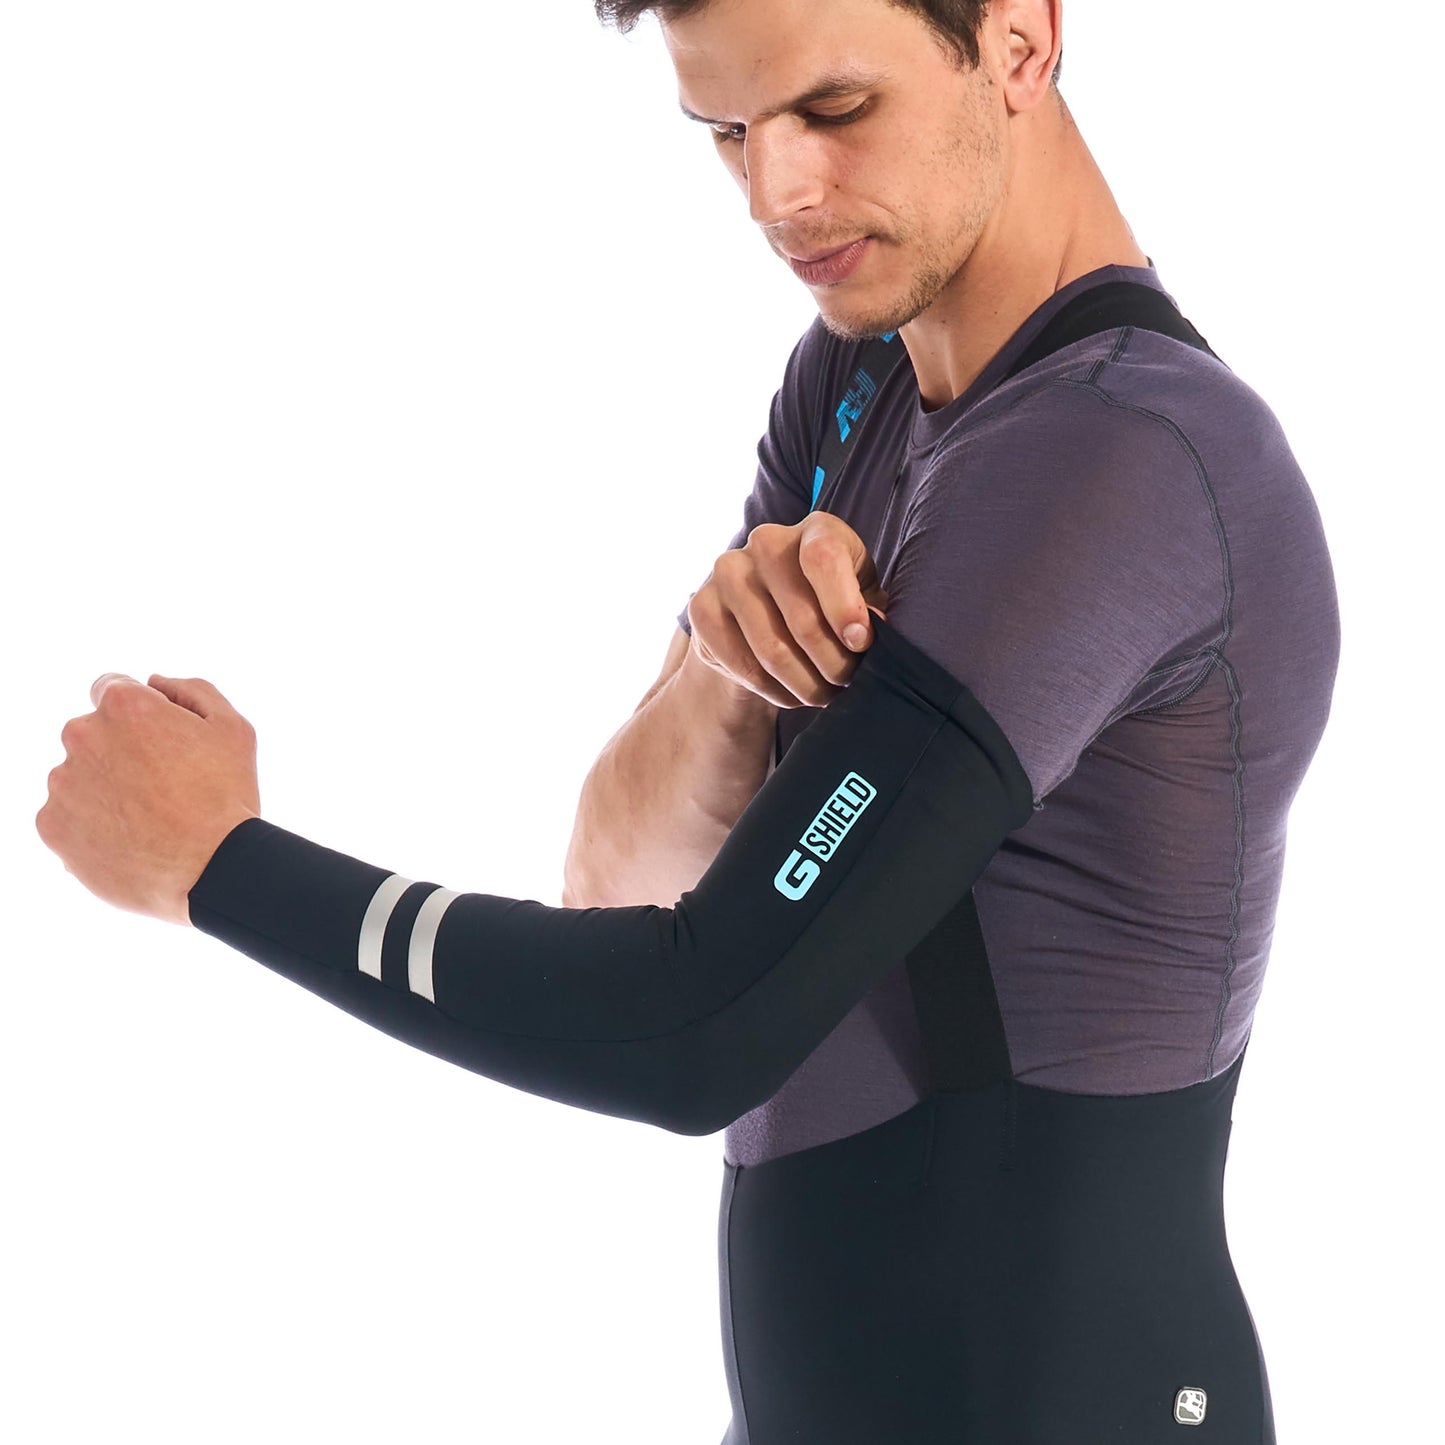 G-Shield Thermal Arm Warmers